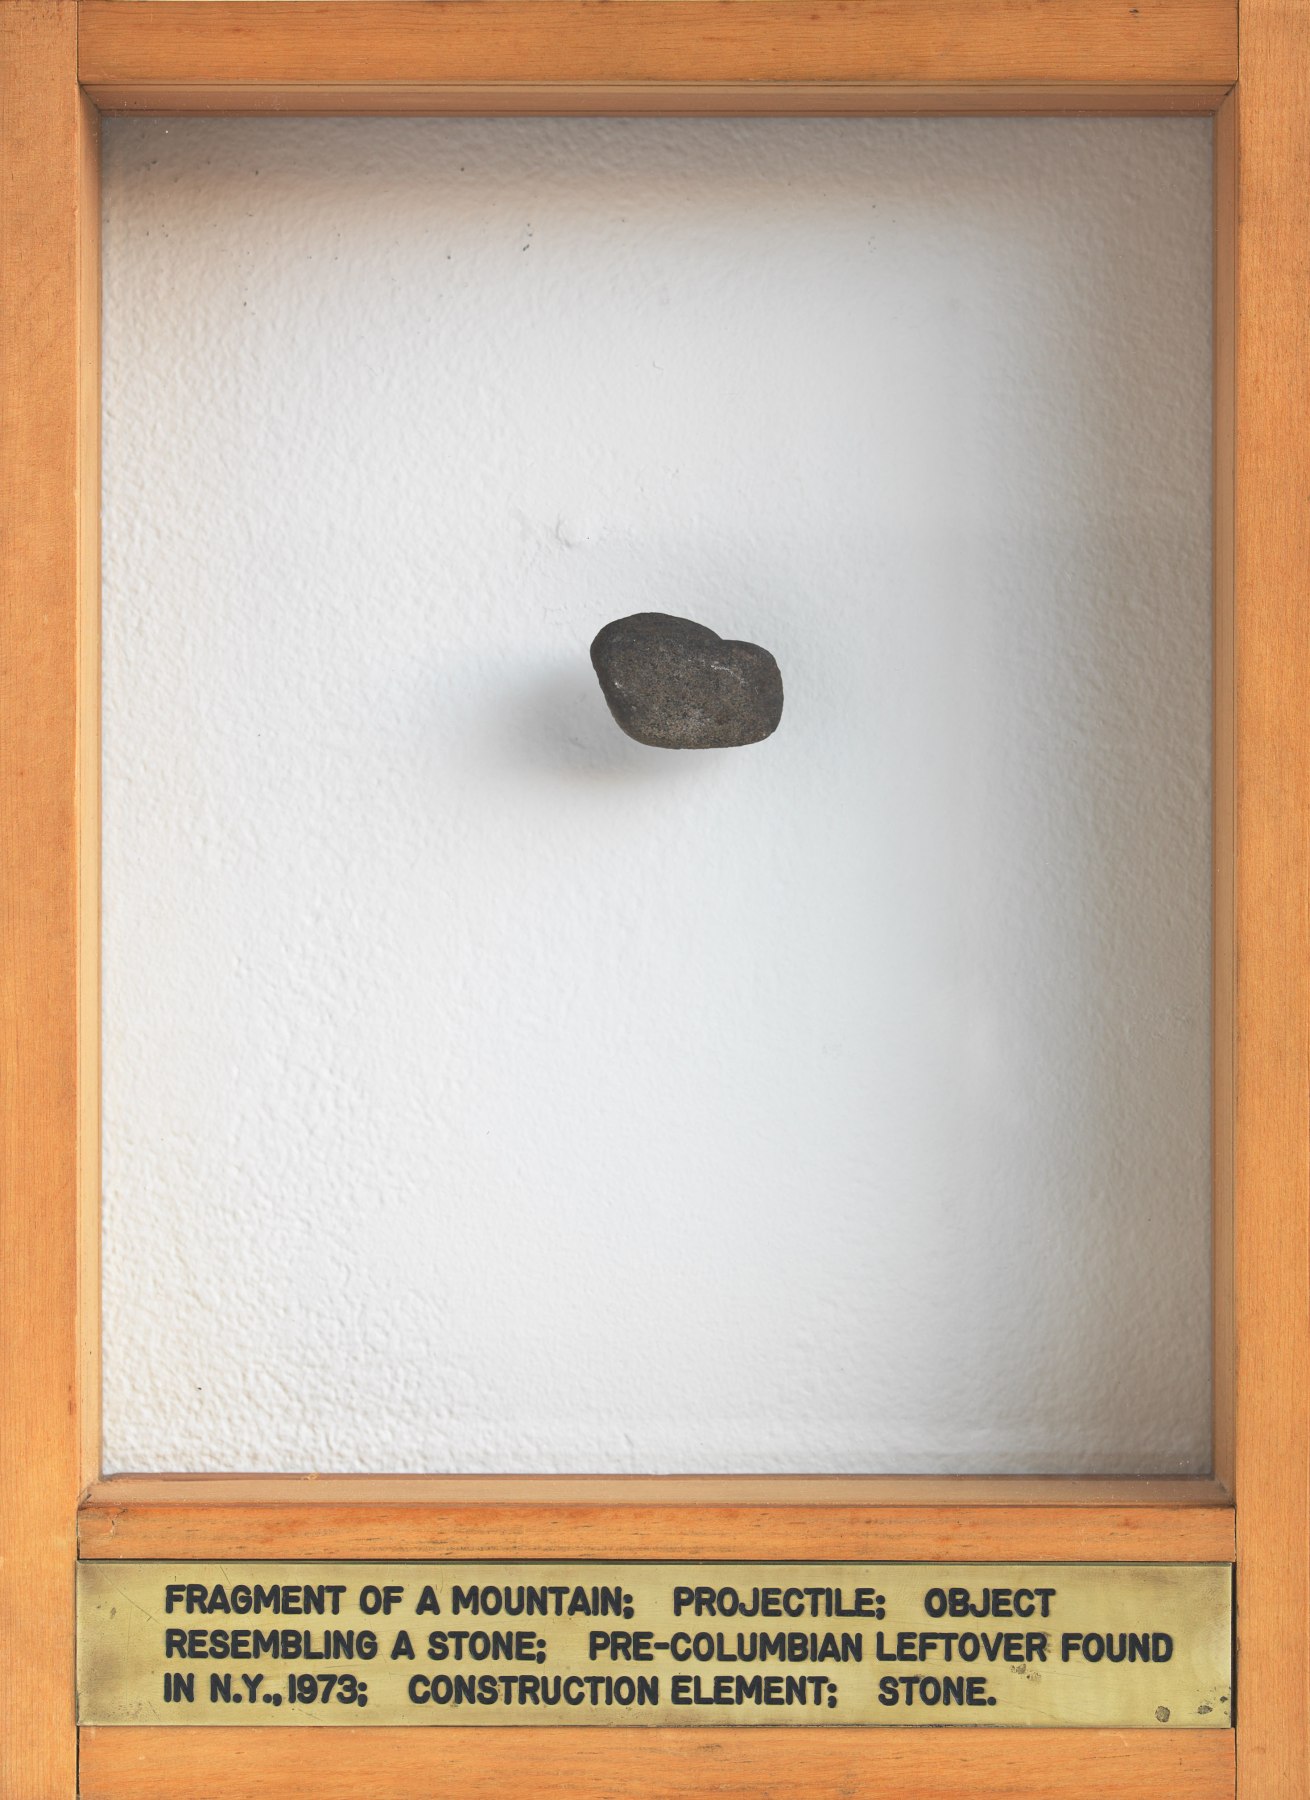 Fragment of a Mountain Projectile Object Resembling Stone; Pre-Columbian Leftover Found in N.Y., 1973; Construction Element; Stone, 1973-1976, Mixed Media